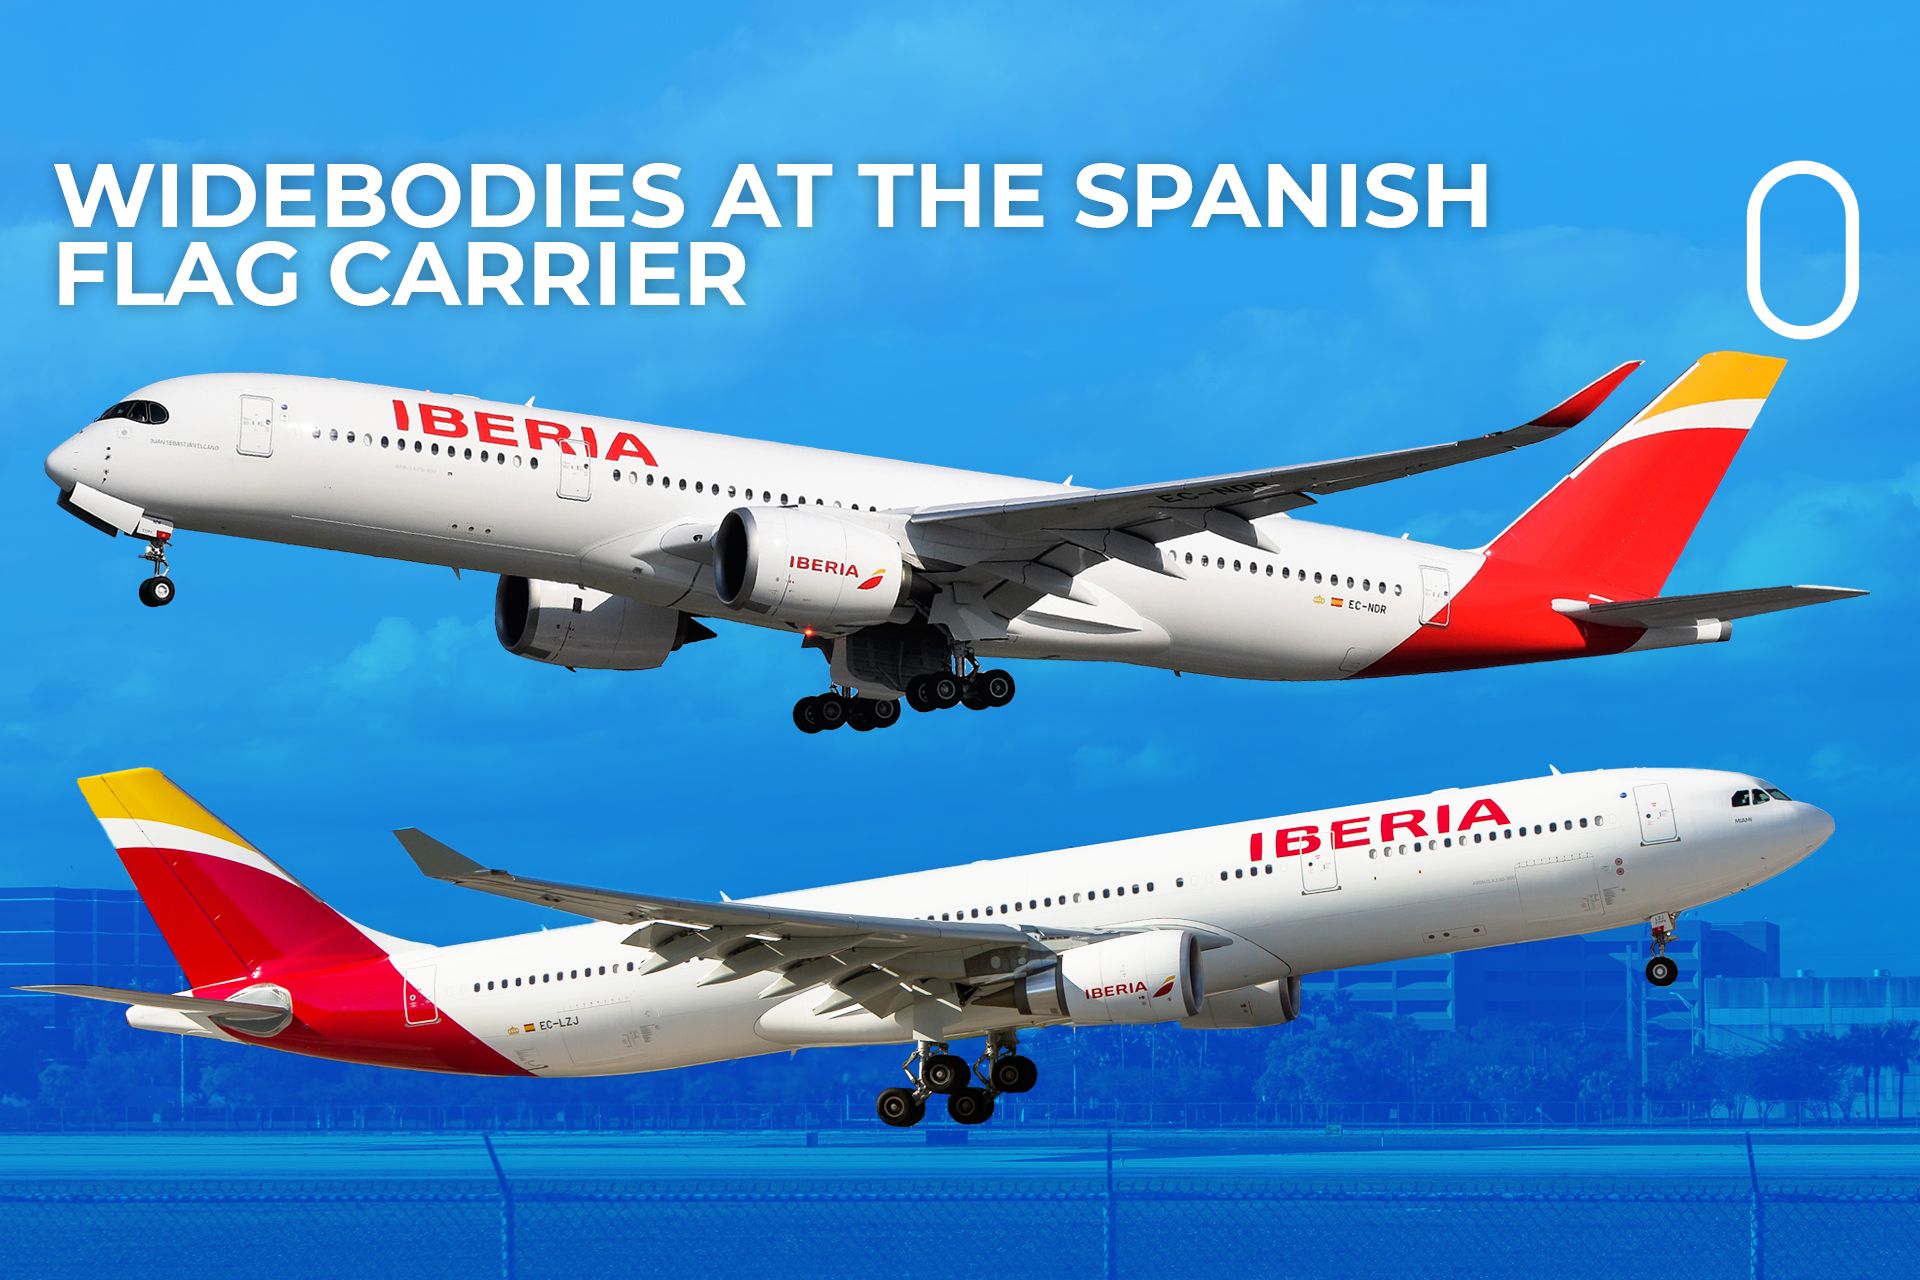 Everything You Need To Know About Iberia's Widebody Fleet